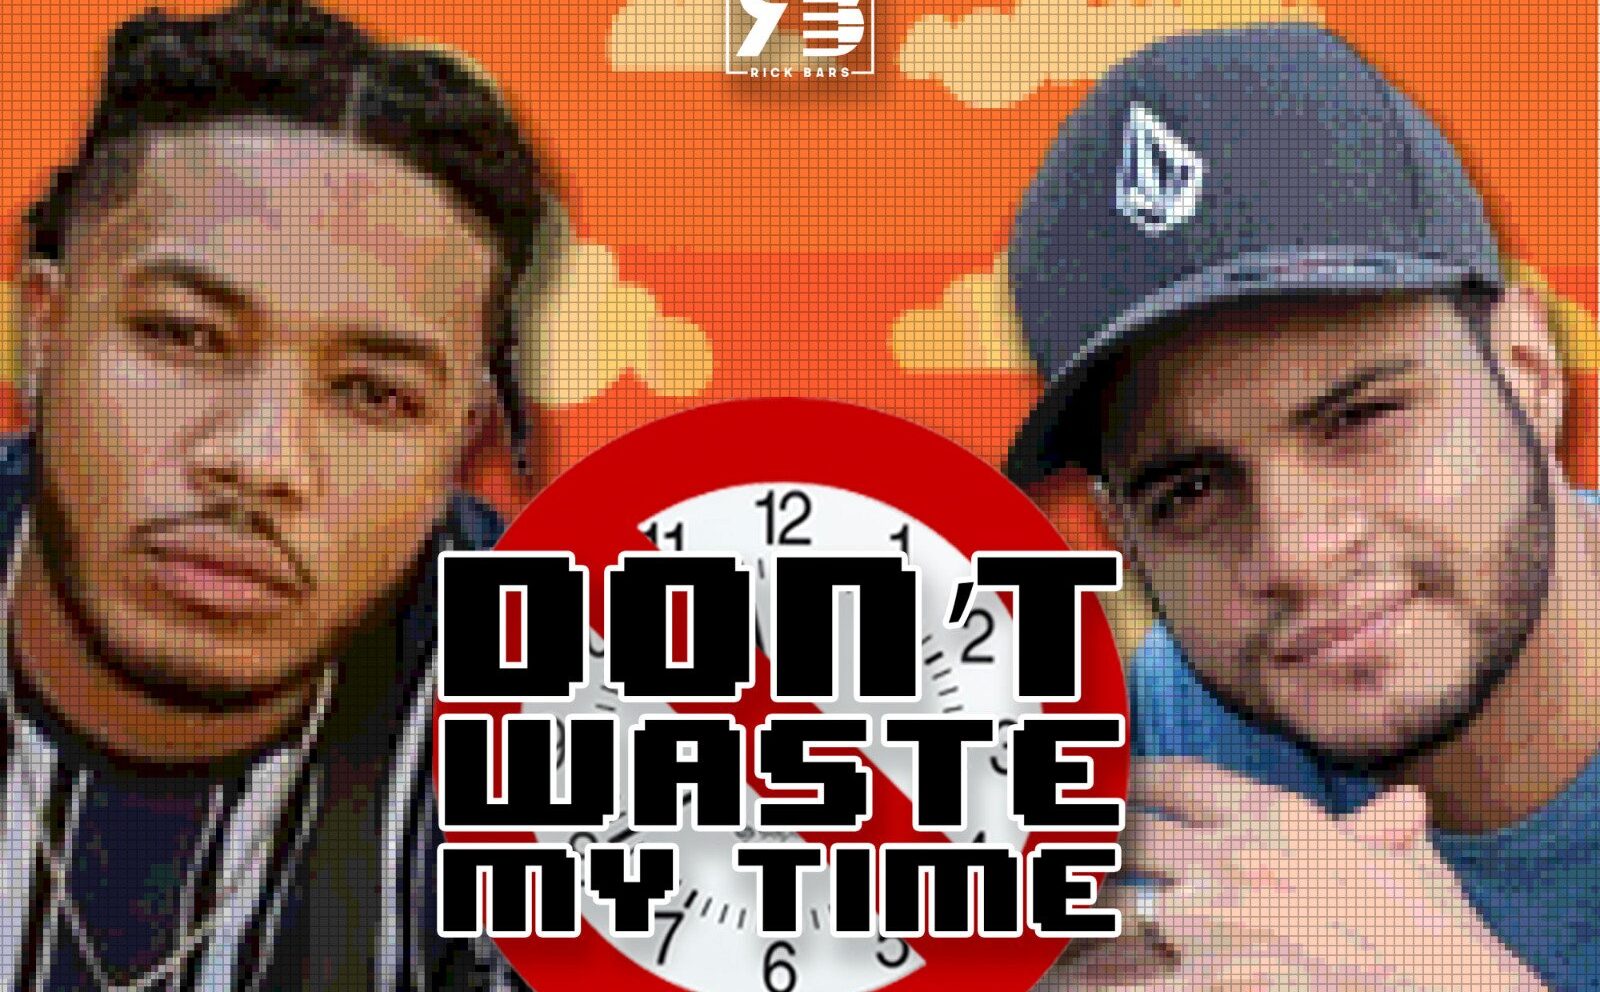 Rick Bars Works with Dreamville Artist Cozz on "Don't Waste My Time"